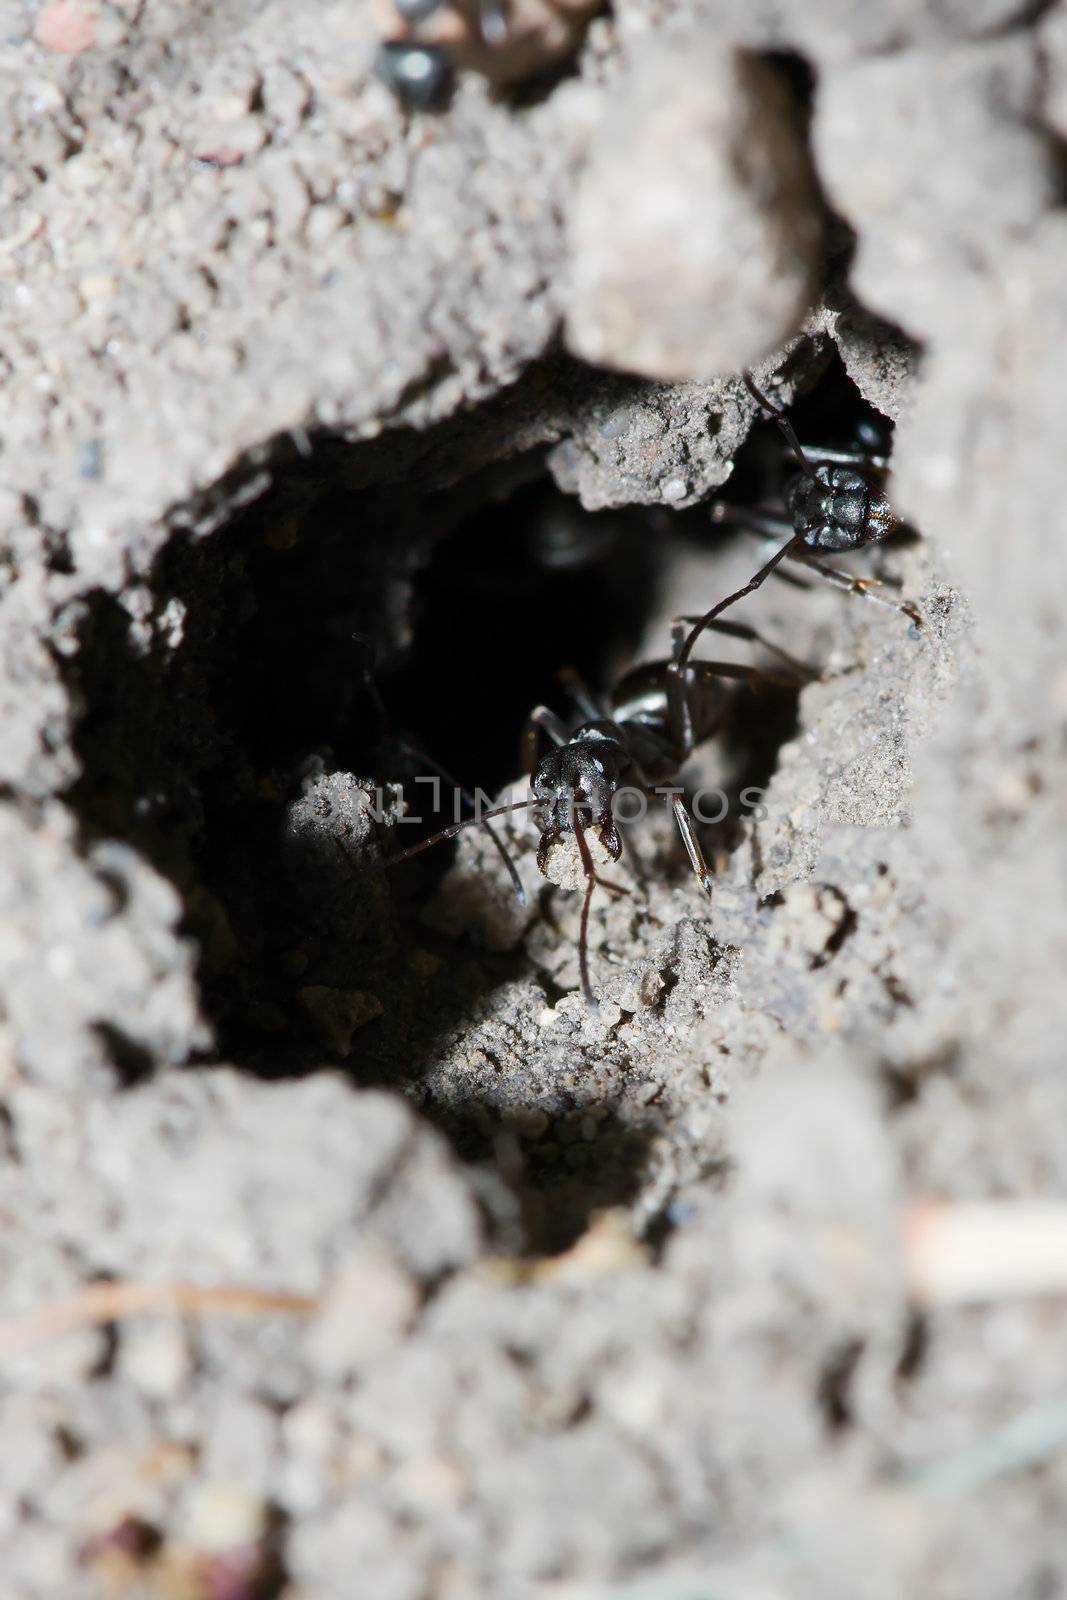 A couple black ants moving dirt around.